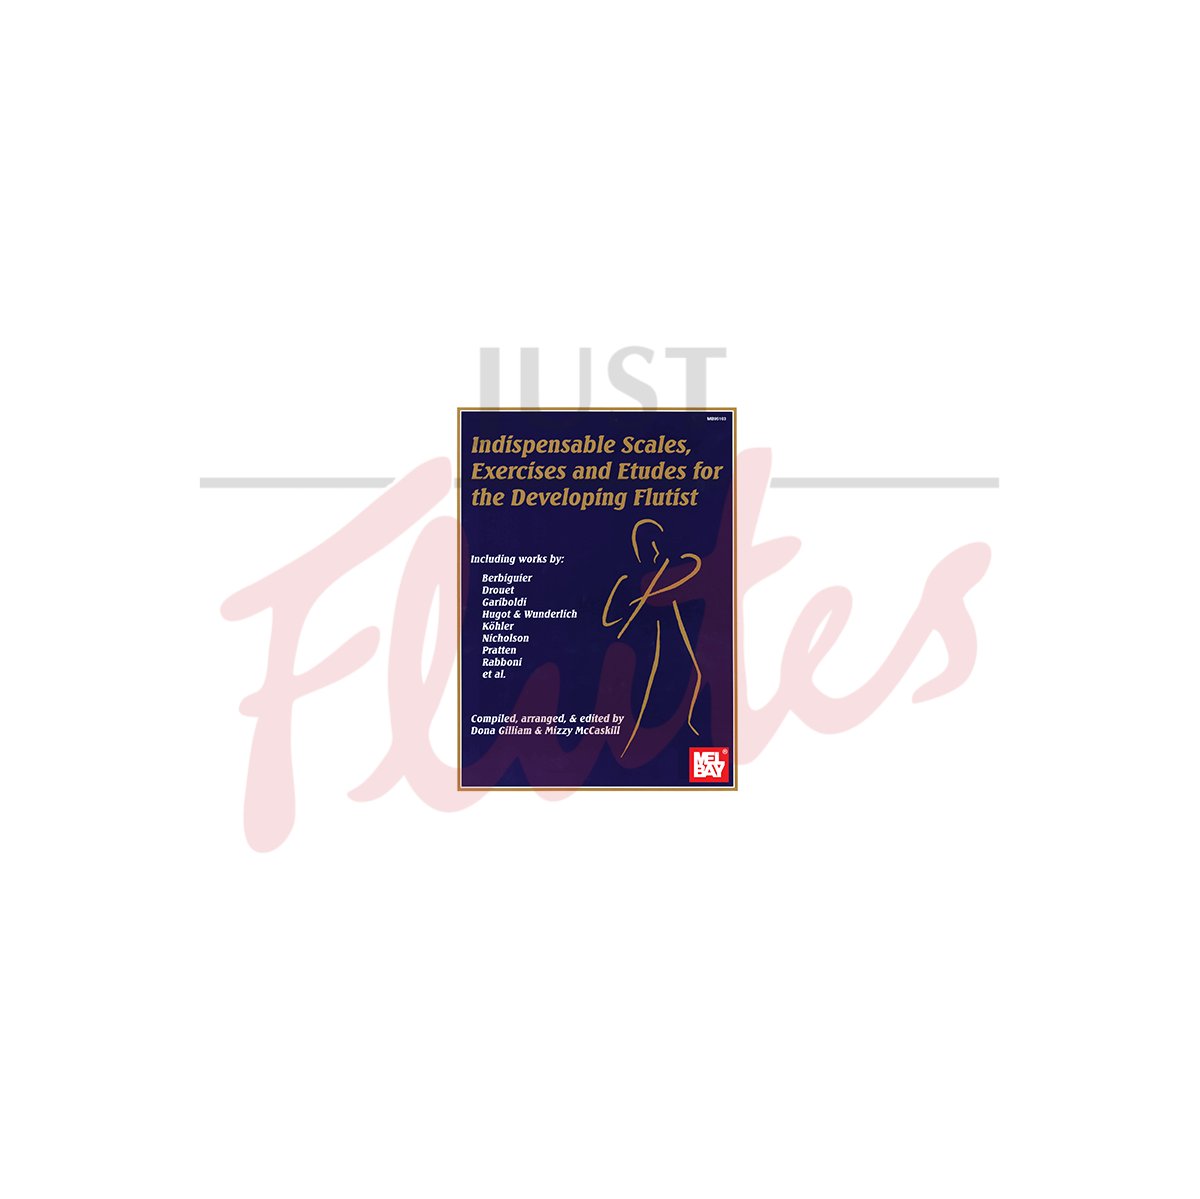 Indispensable Scales, Exercises and Etudes for the Developing Flutist